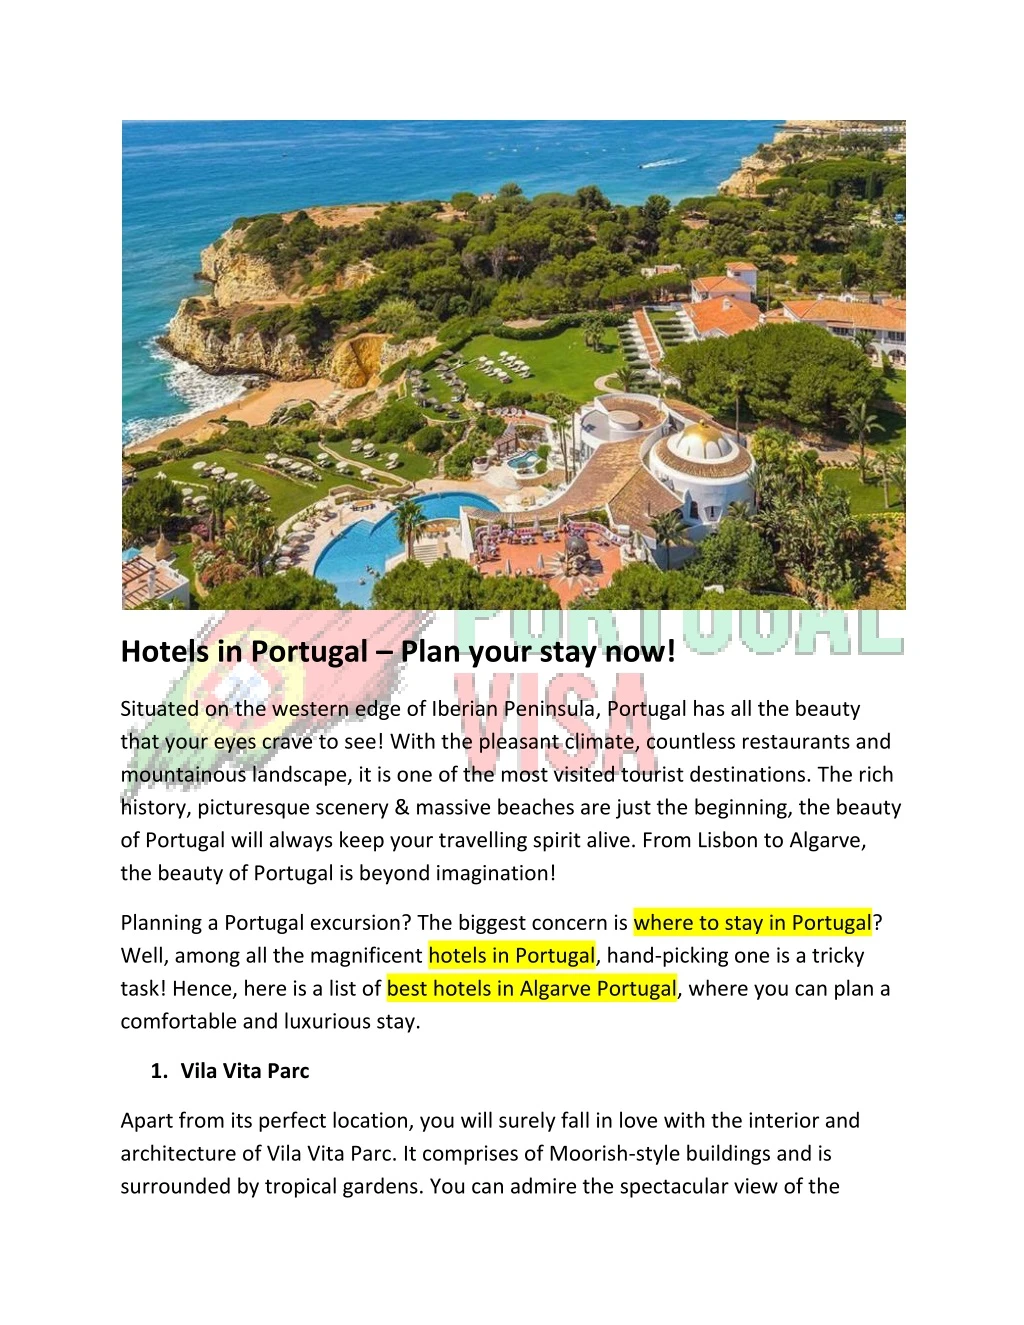 hotels in portugal plan your stay now n.